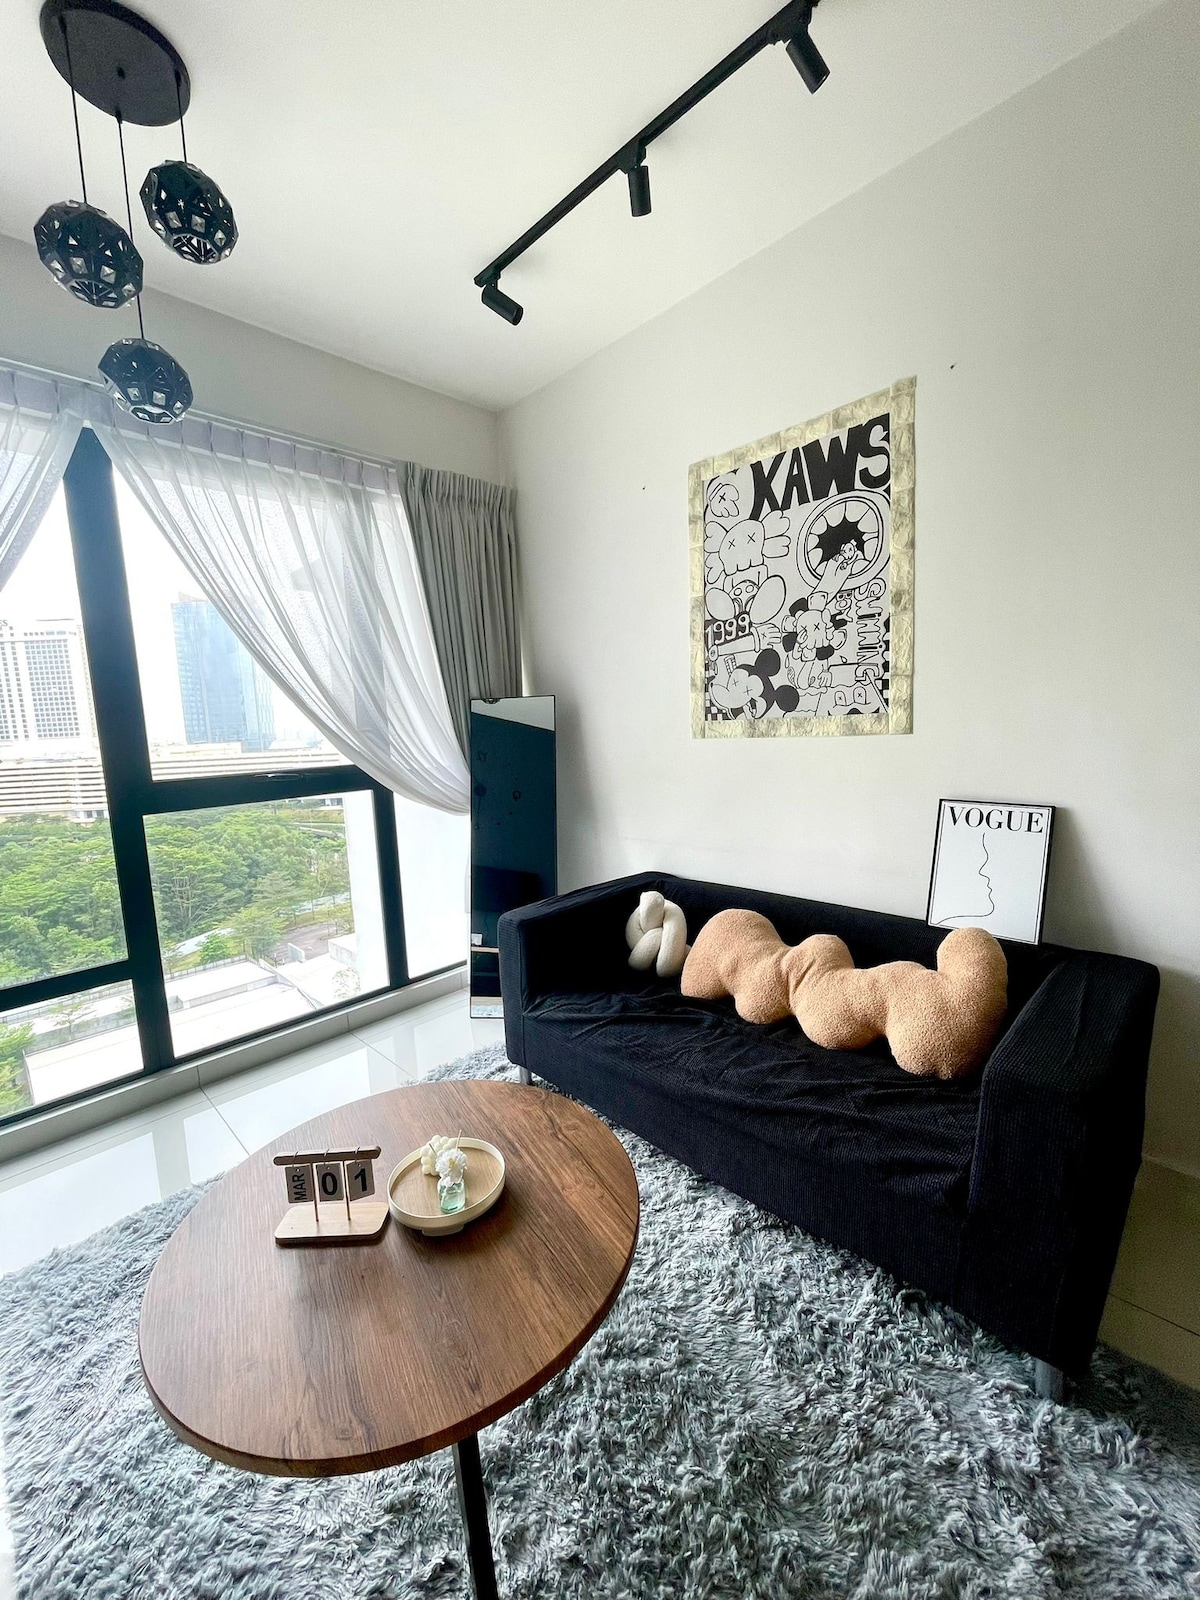 Midvalley southkey/Mosaic 2BR6PAX